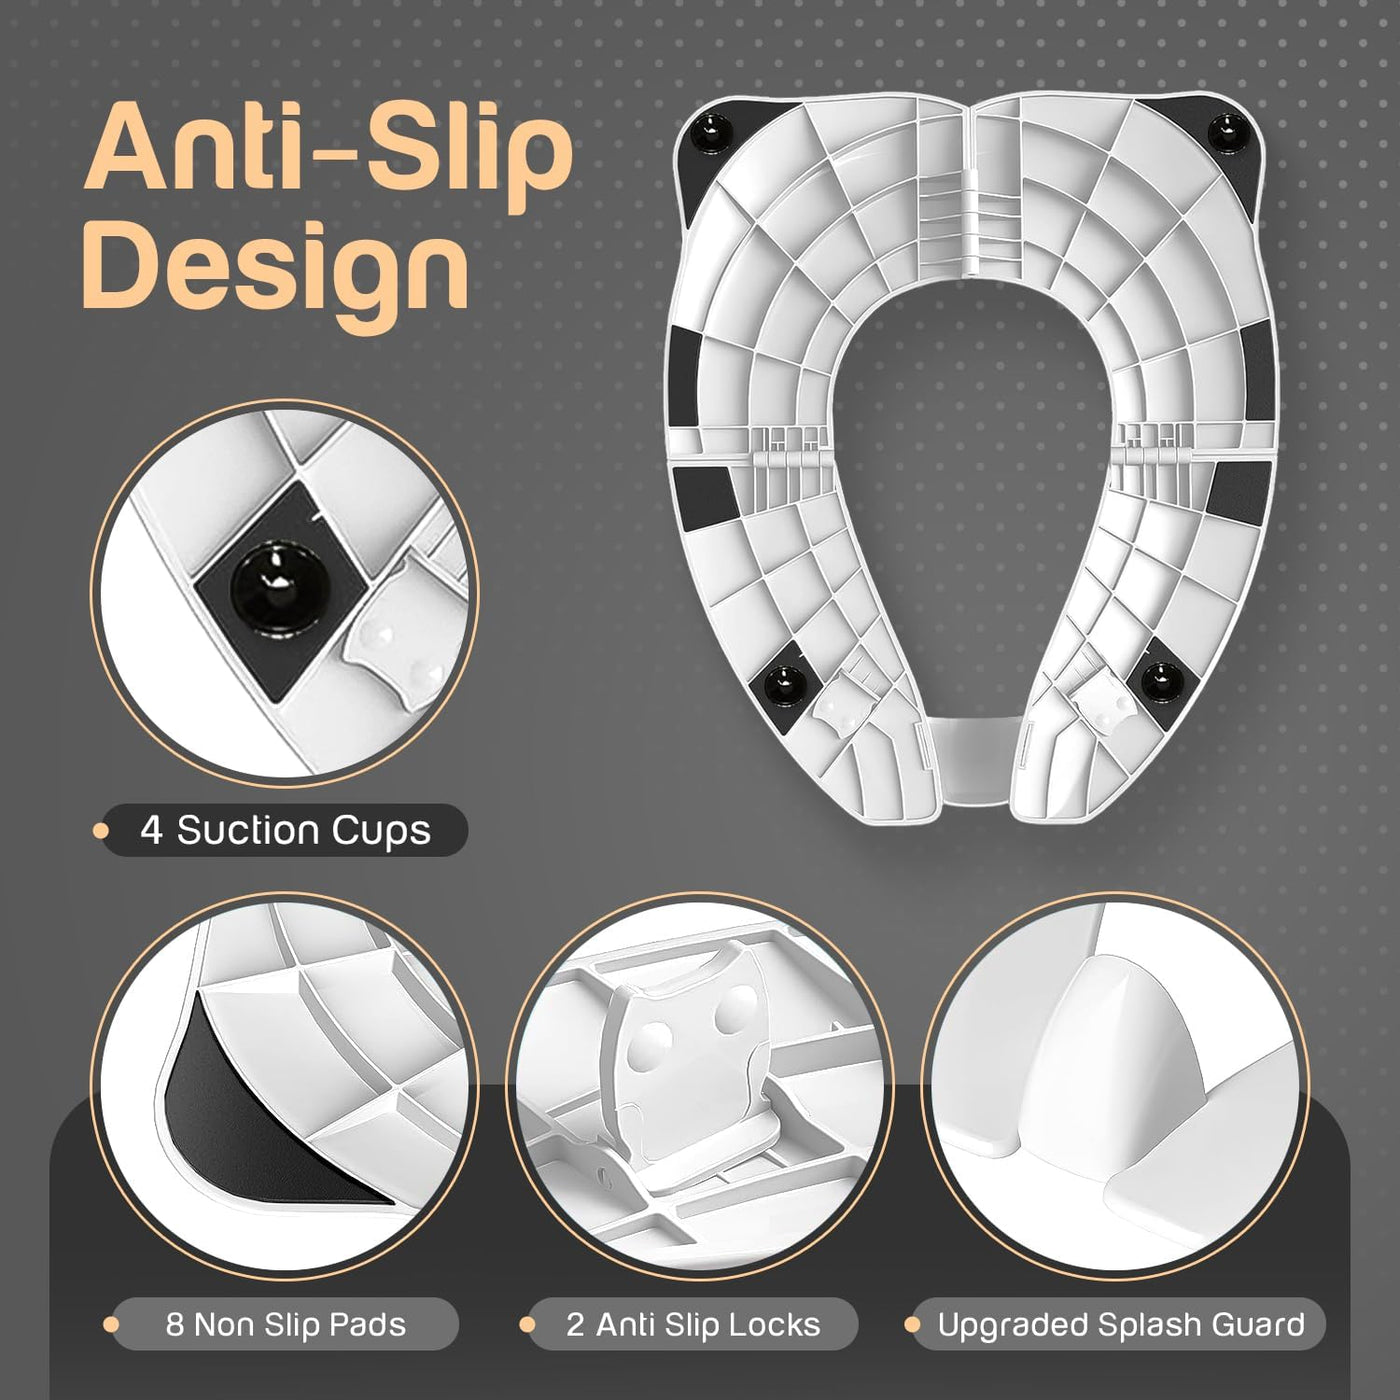 Foldable Toilet Seat Trainer